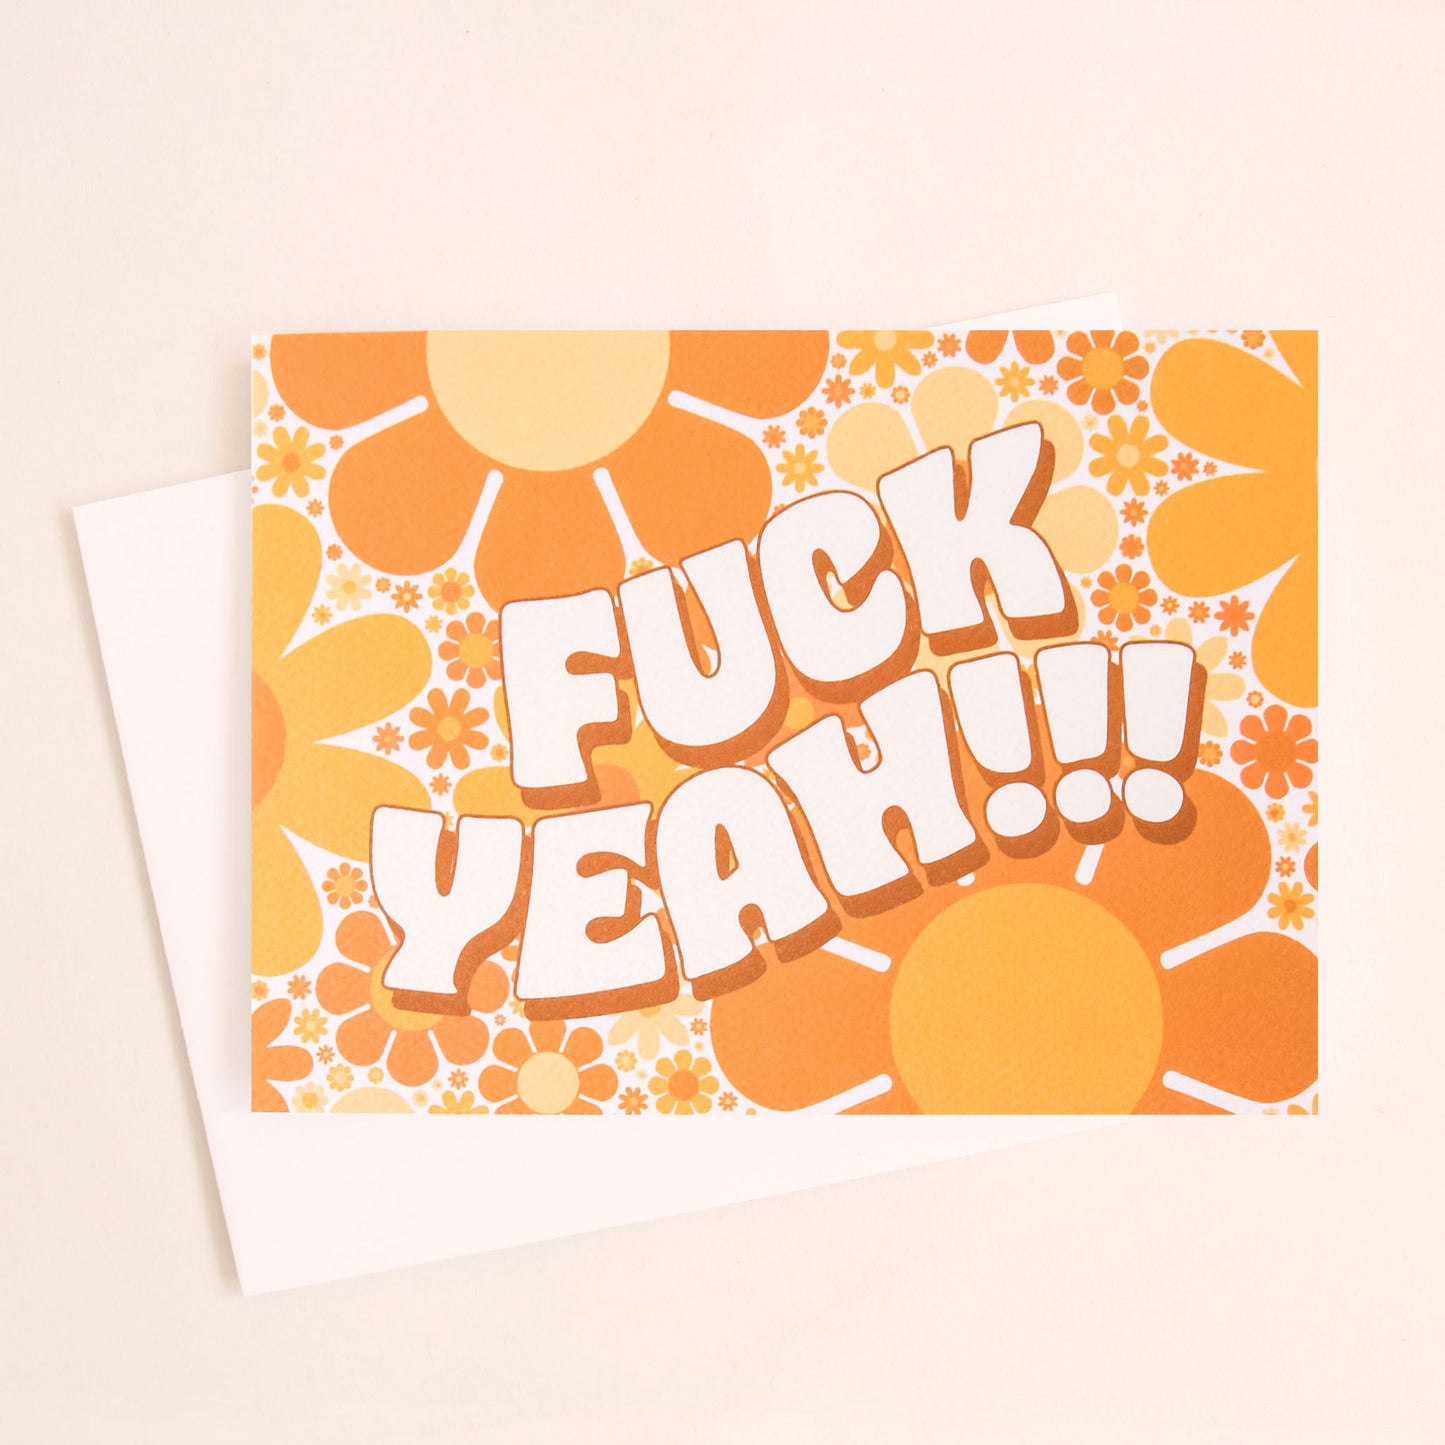 Greeting card filled with retro yellow and orange flowers. The card reads 'fuck yeah!!!' in curved white bubble lettering. The card is accompanied by a solid white envelope. 